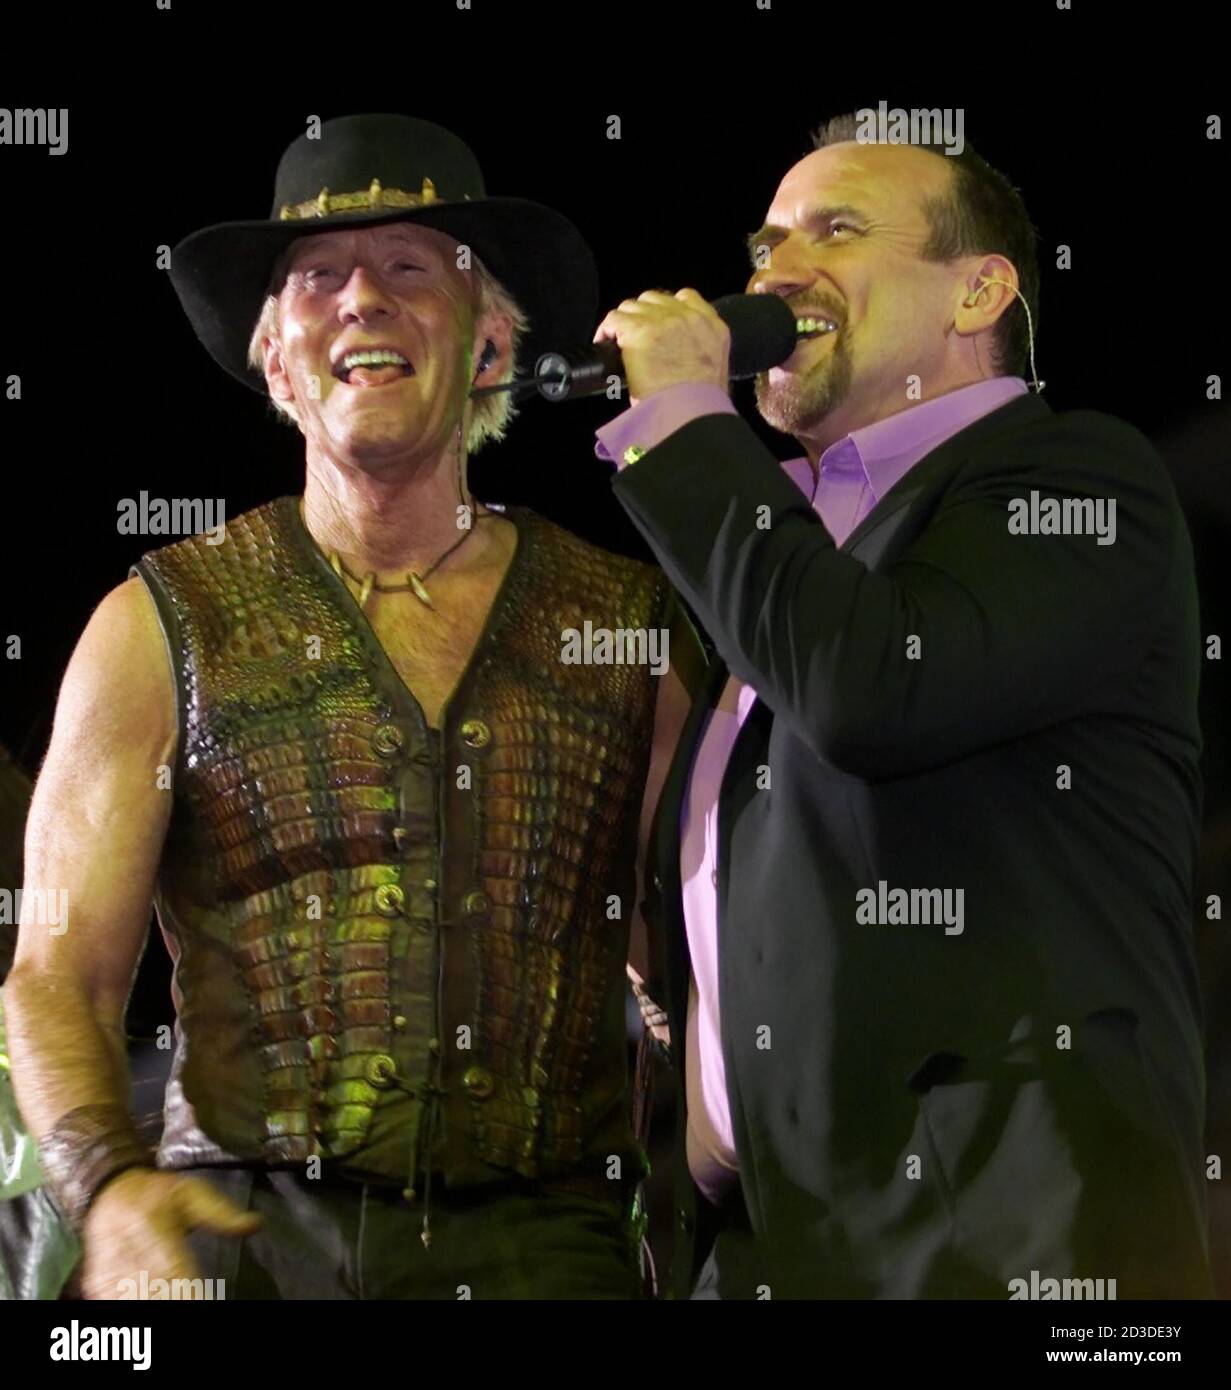 Australian singer Scott Colin Hay (L) pop band Men At performs with actor Paul Hogan, of Crocodile Dundee fame, during the closing ceremonies of the Olympic Games in Sydney